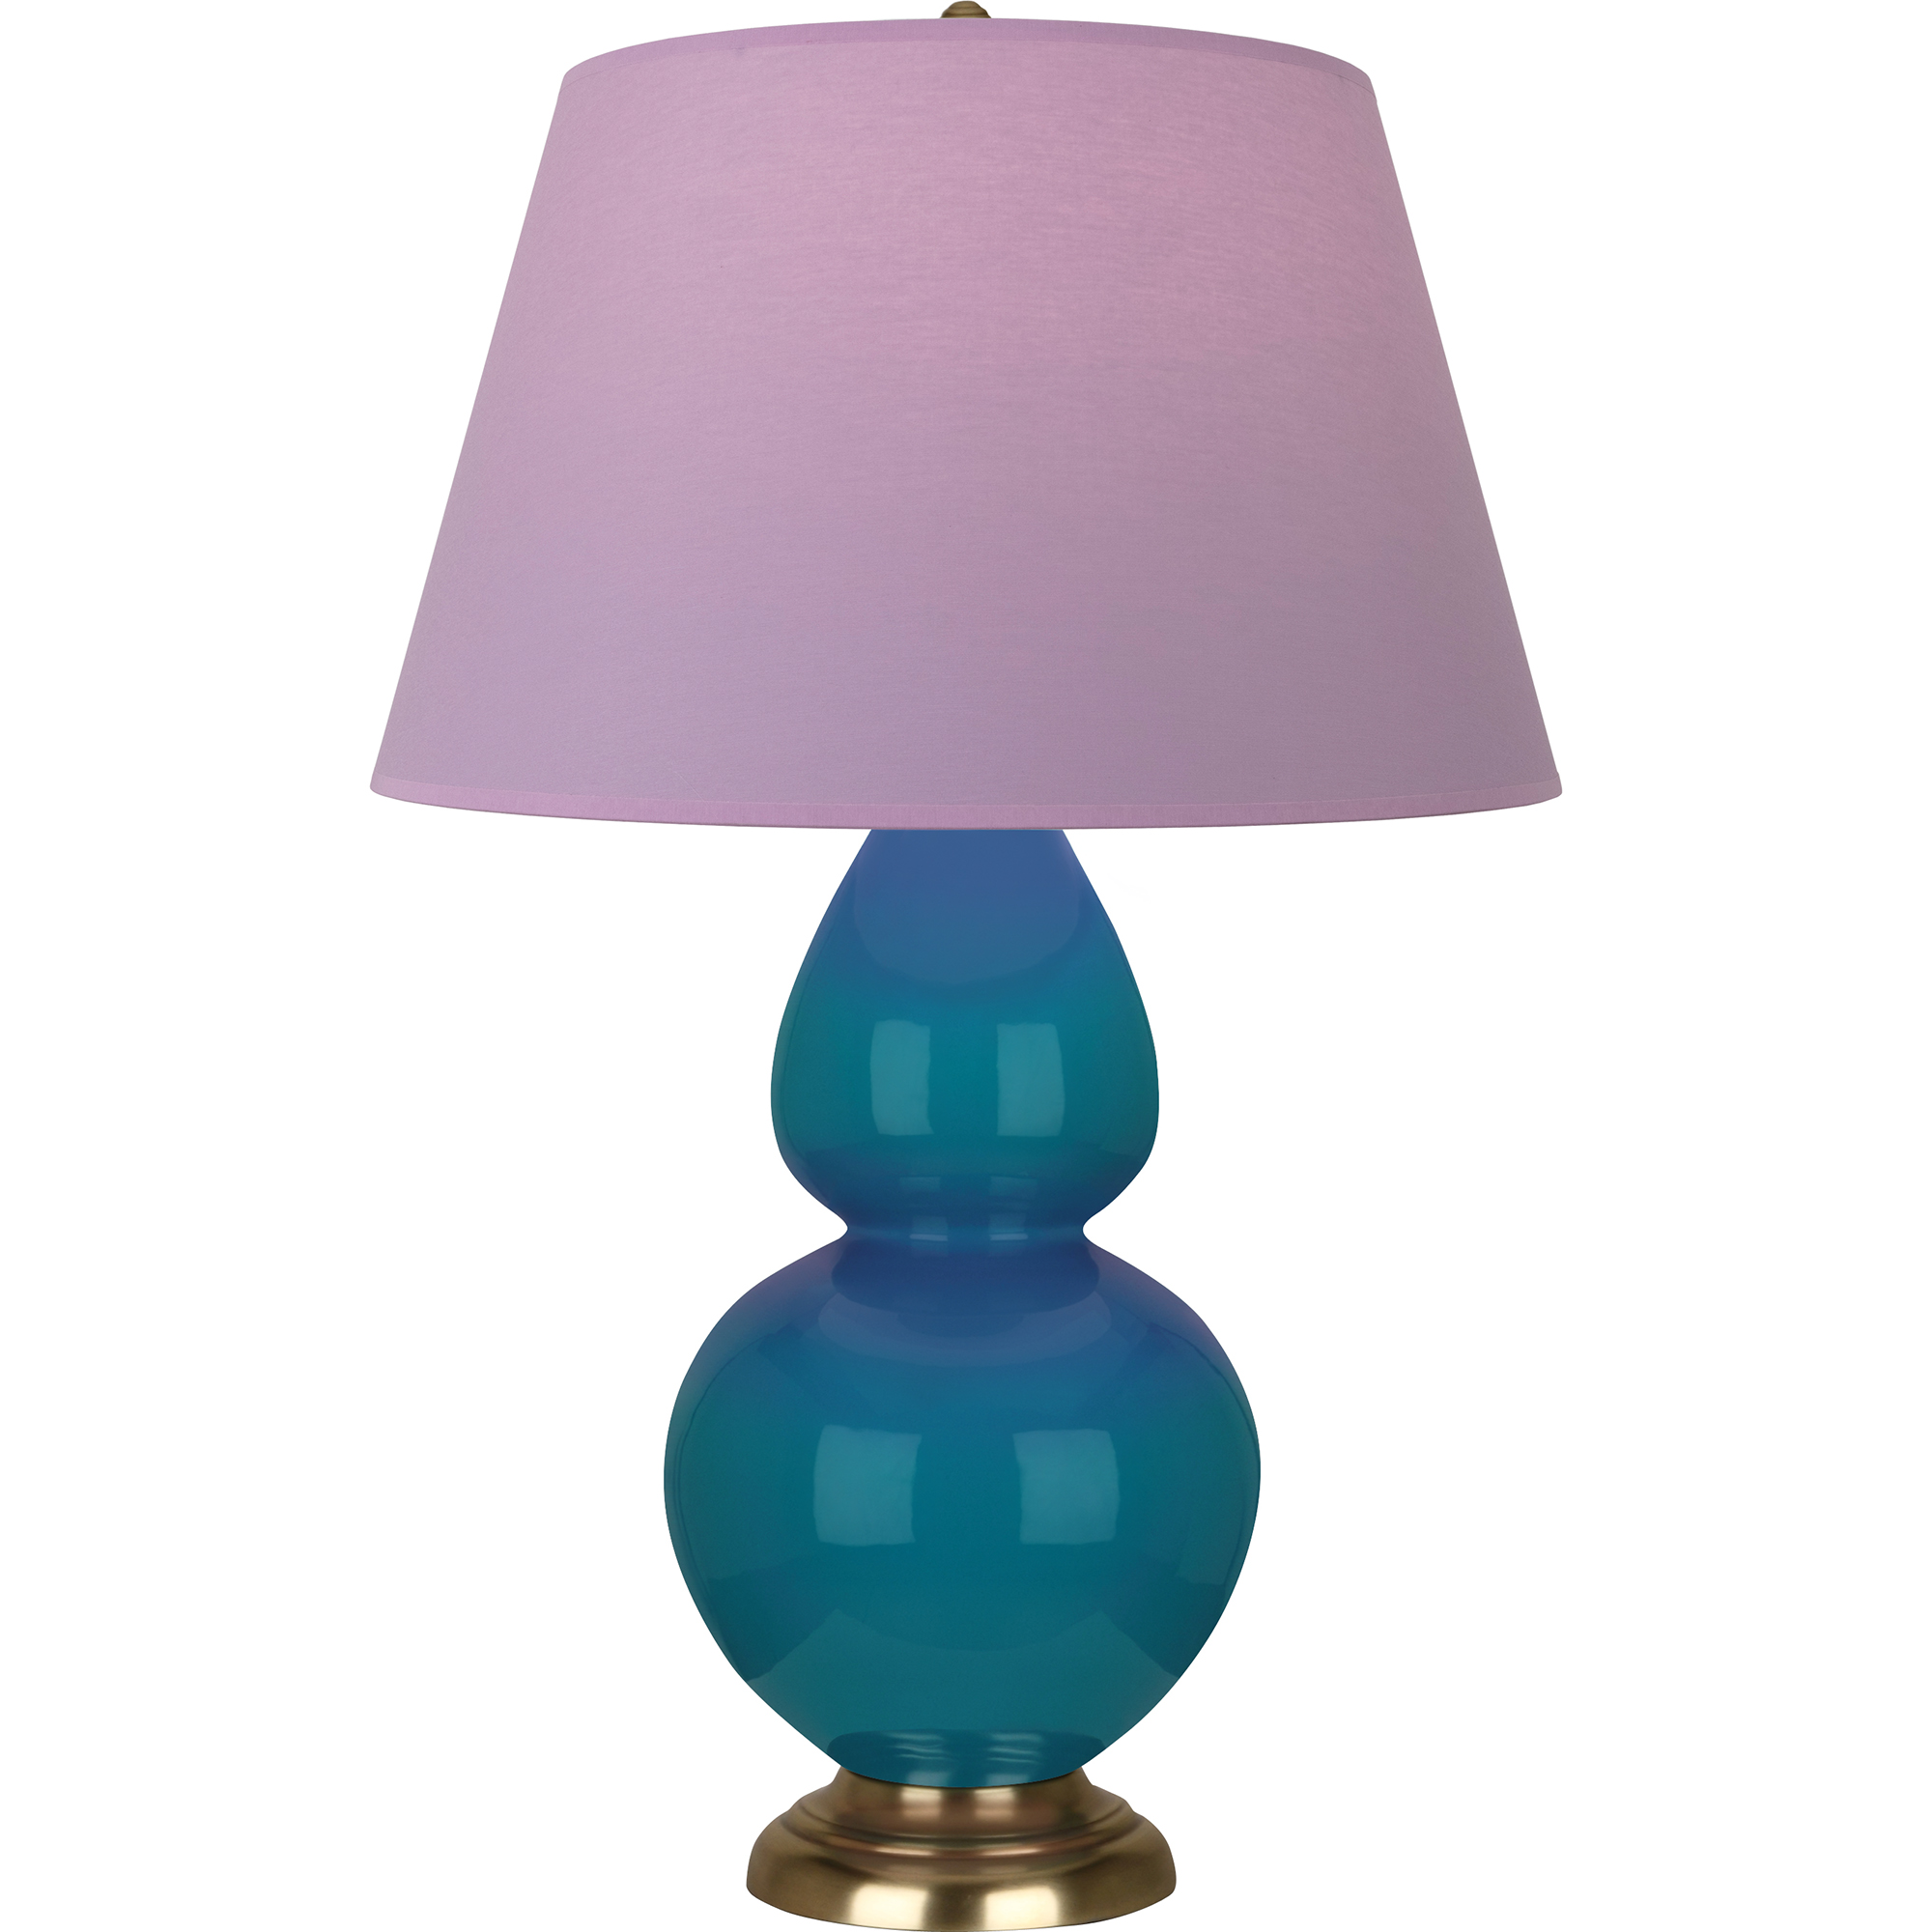 Double Gourd Table Lamp Style #1751L